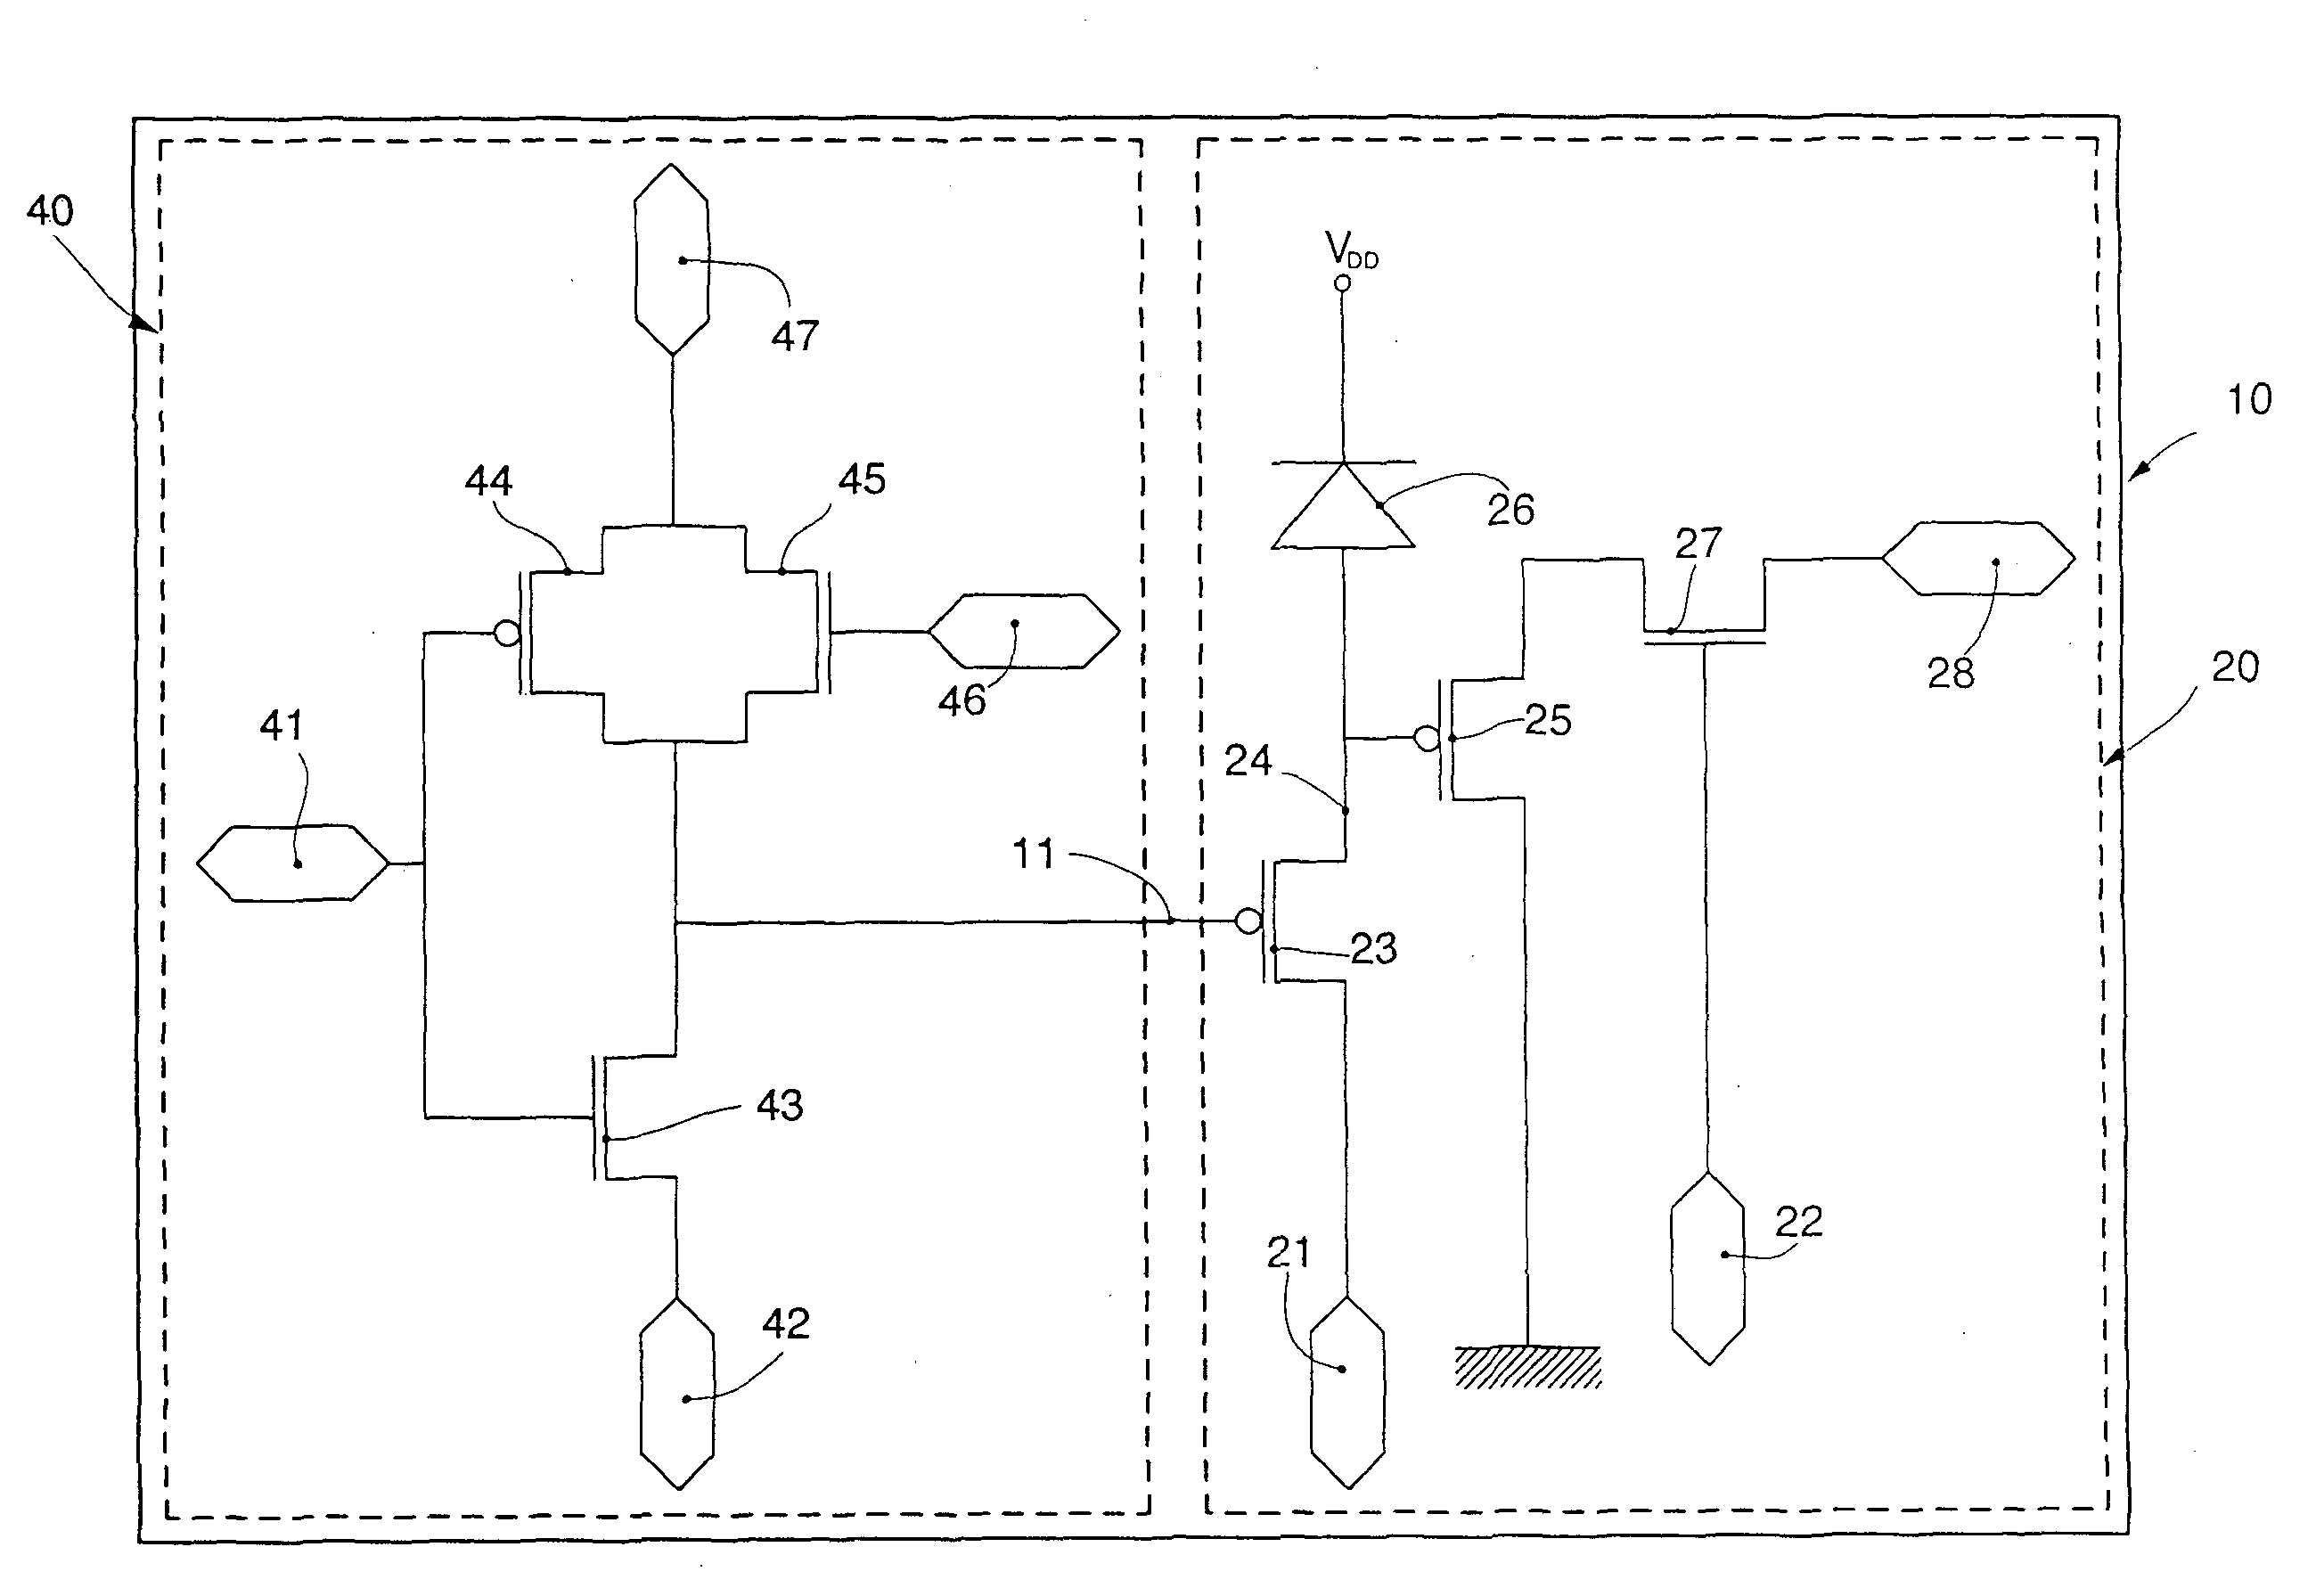 Photo-detector device for electro-optical sensors with variable light dynamics